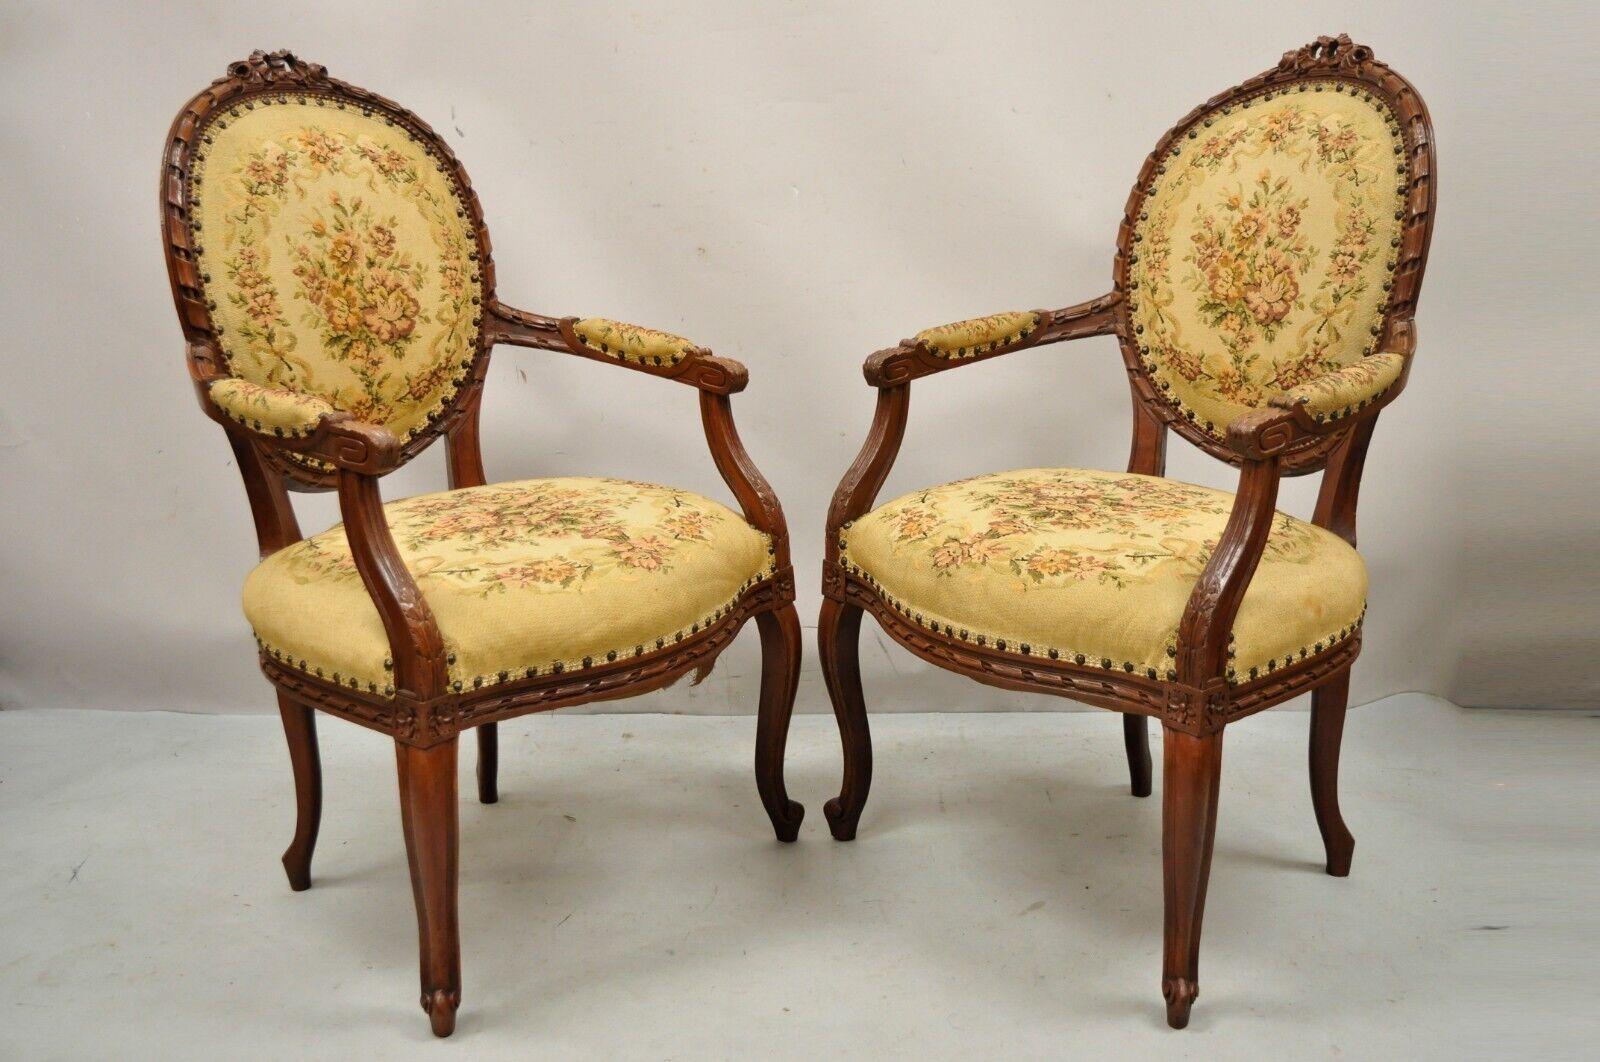 Antique French Country Louis XV Victorian Floral Tapestry Arm Chairs, a Pair For Sale 6